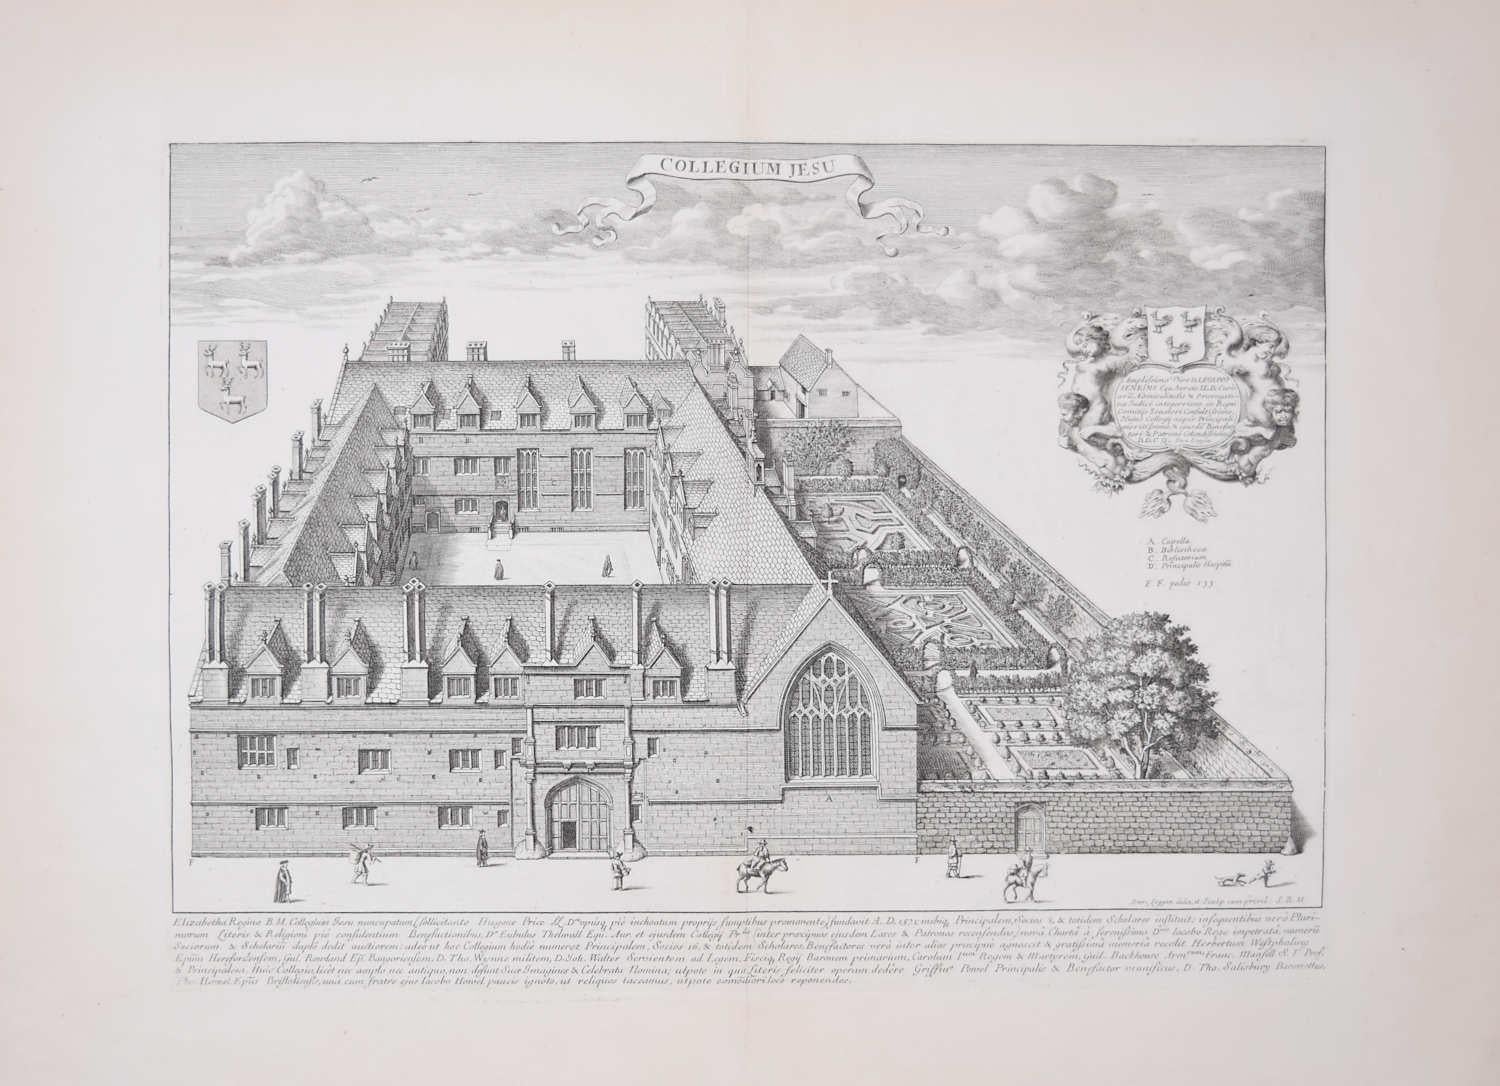 David Loggan (1634-1692)
Jesus College, Oxford
Engraving, 1675
30 x 41cm

To see our other views of Oxford and Cambridge, scroll down to "More from this Seller" and below it click on "See all from this Seller" - or send us a message if you cannot